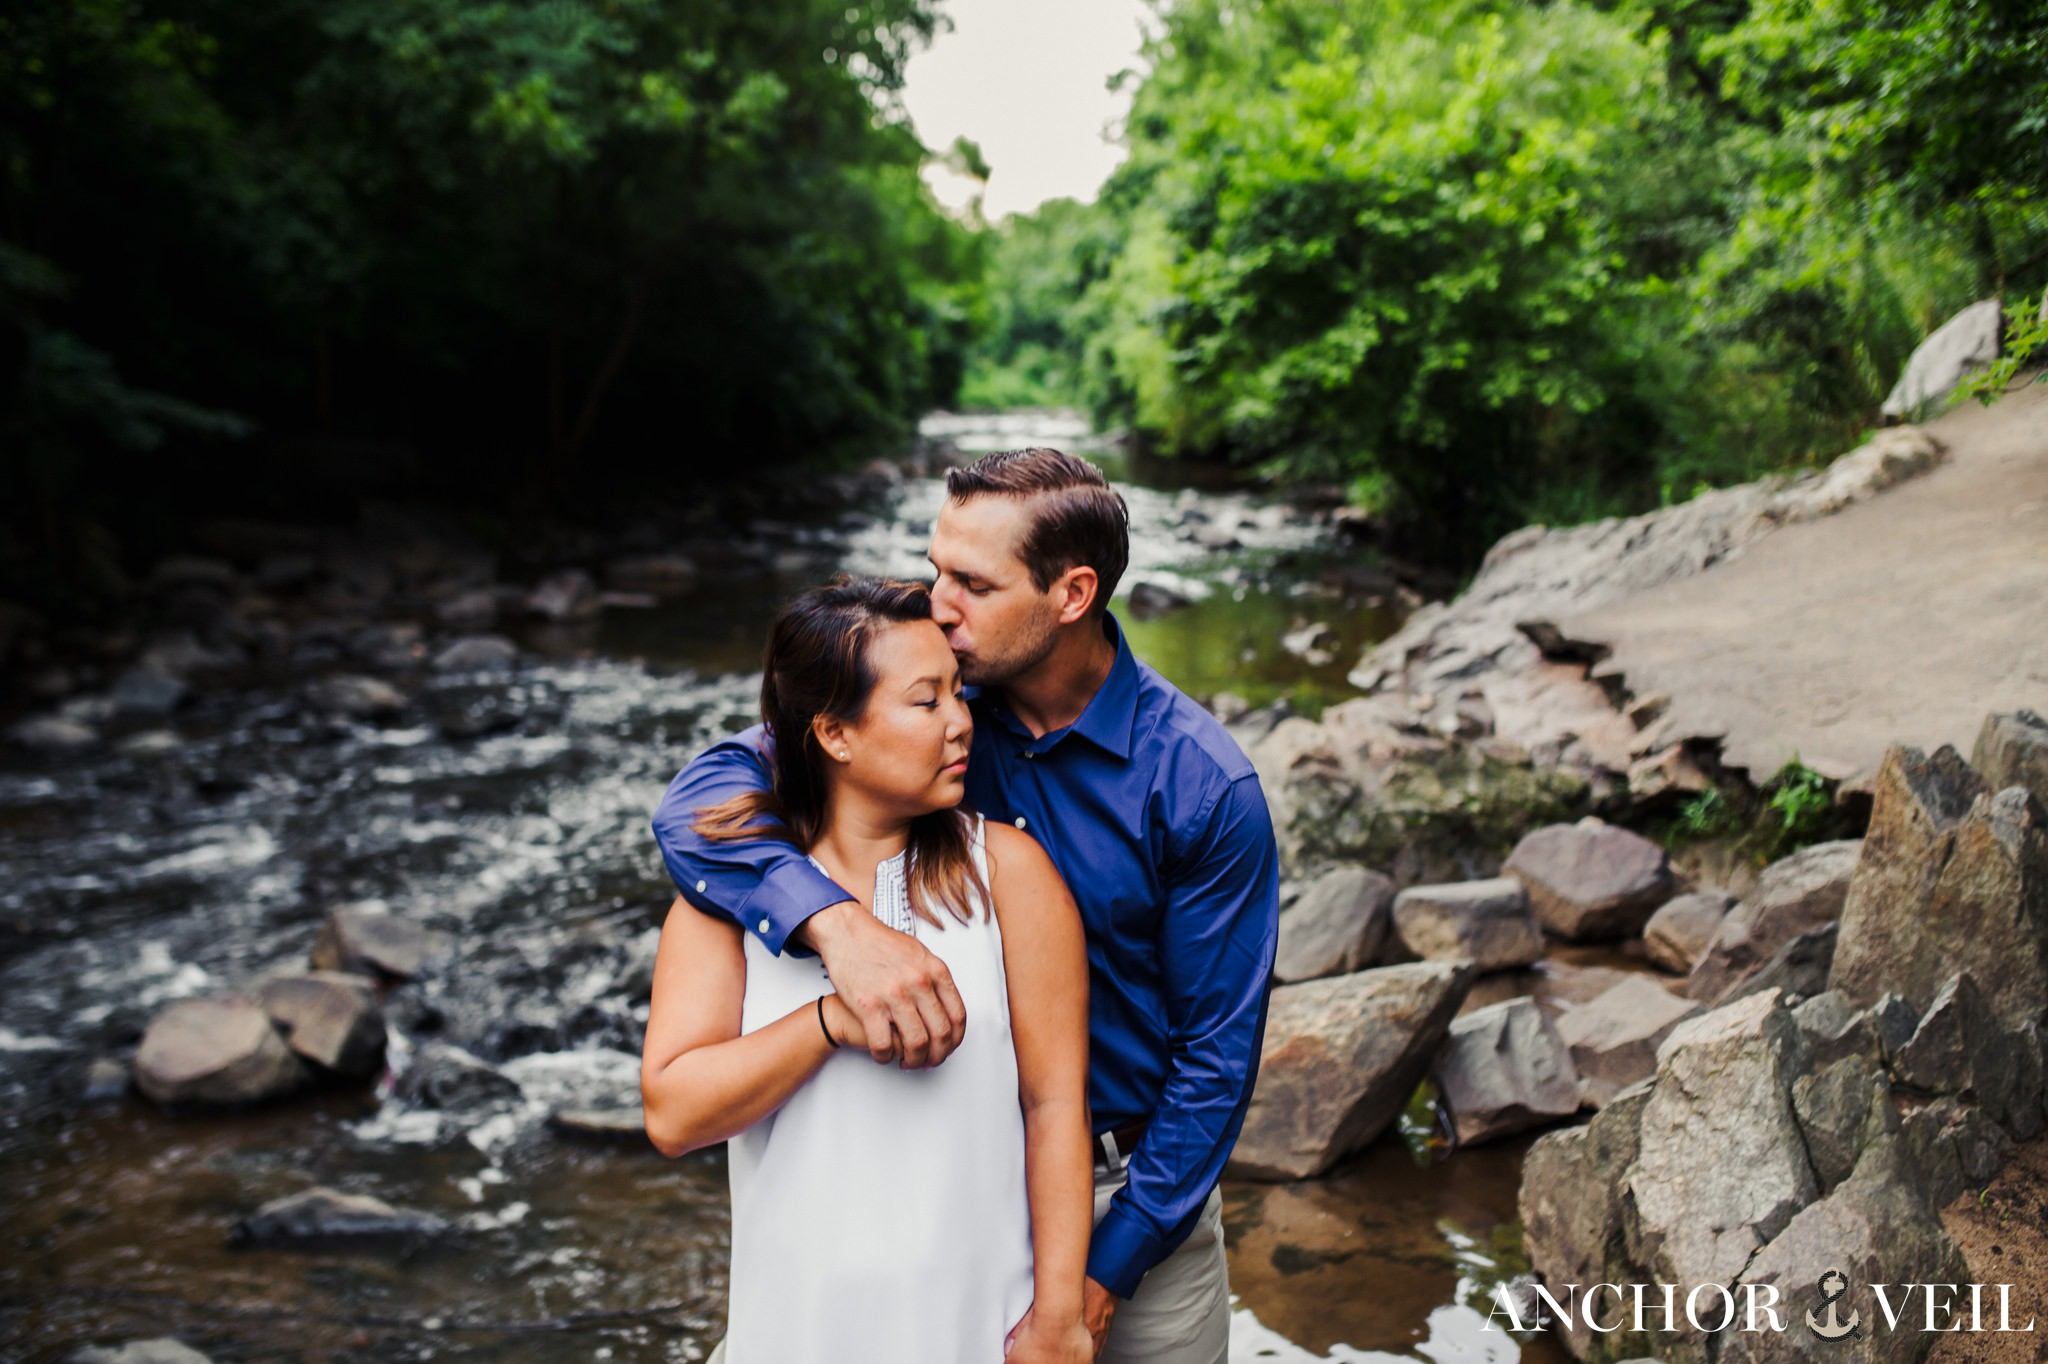 standing the river holding each other during their Freedom Park Engagement Session